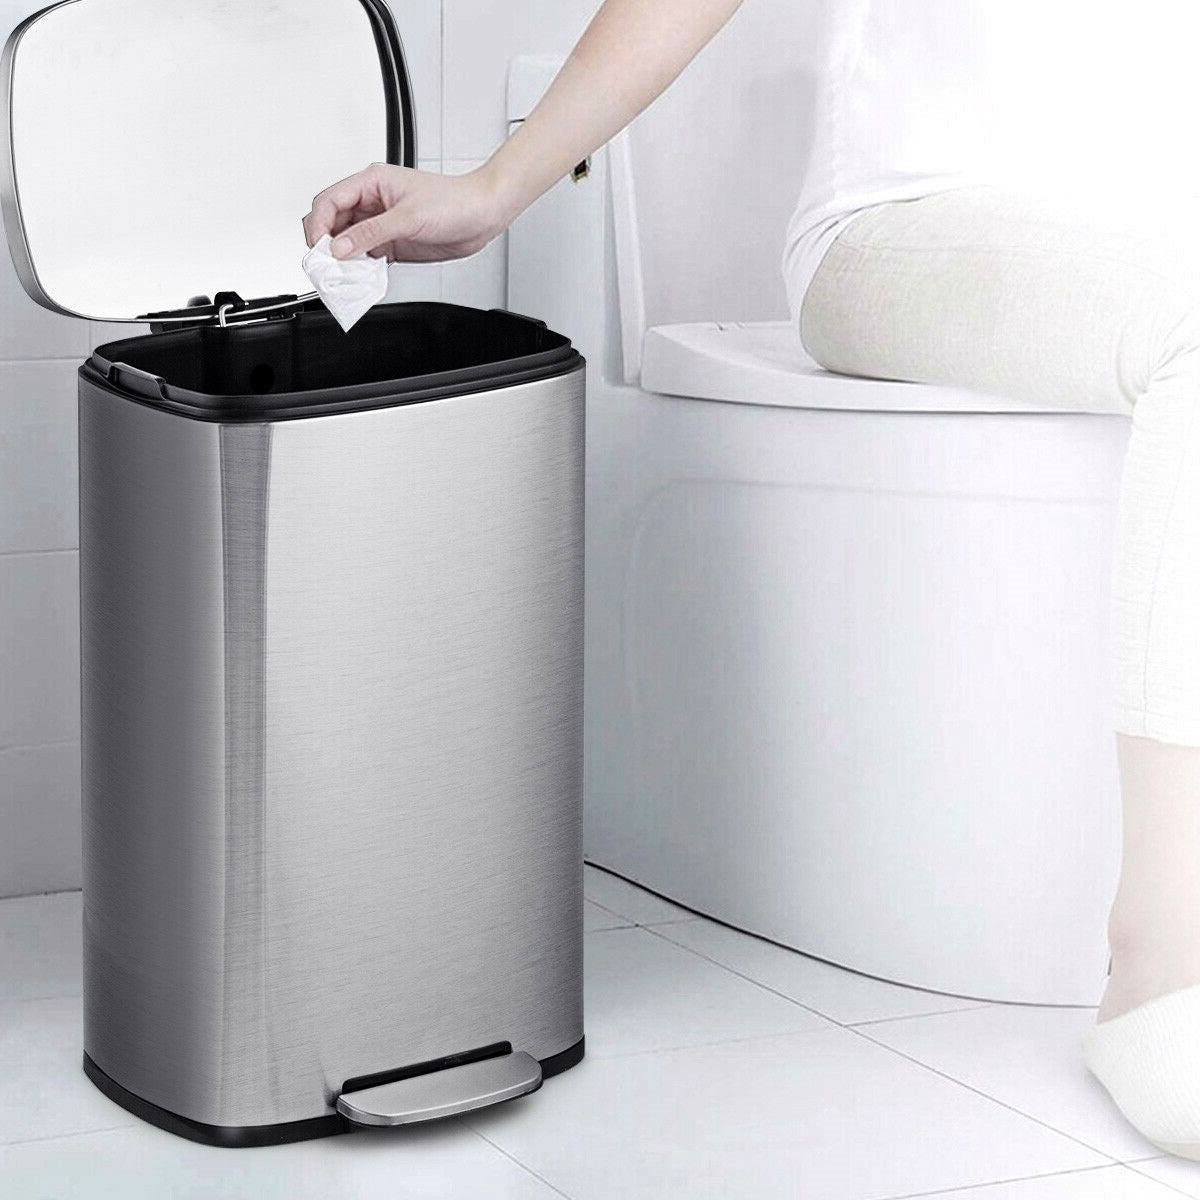 13-Gallon Modern Stainless Steel Kitchen Trash Can with Foot Step Pedal Design-Novel Home